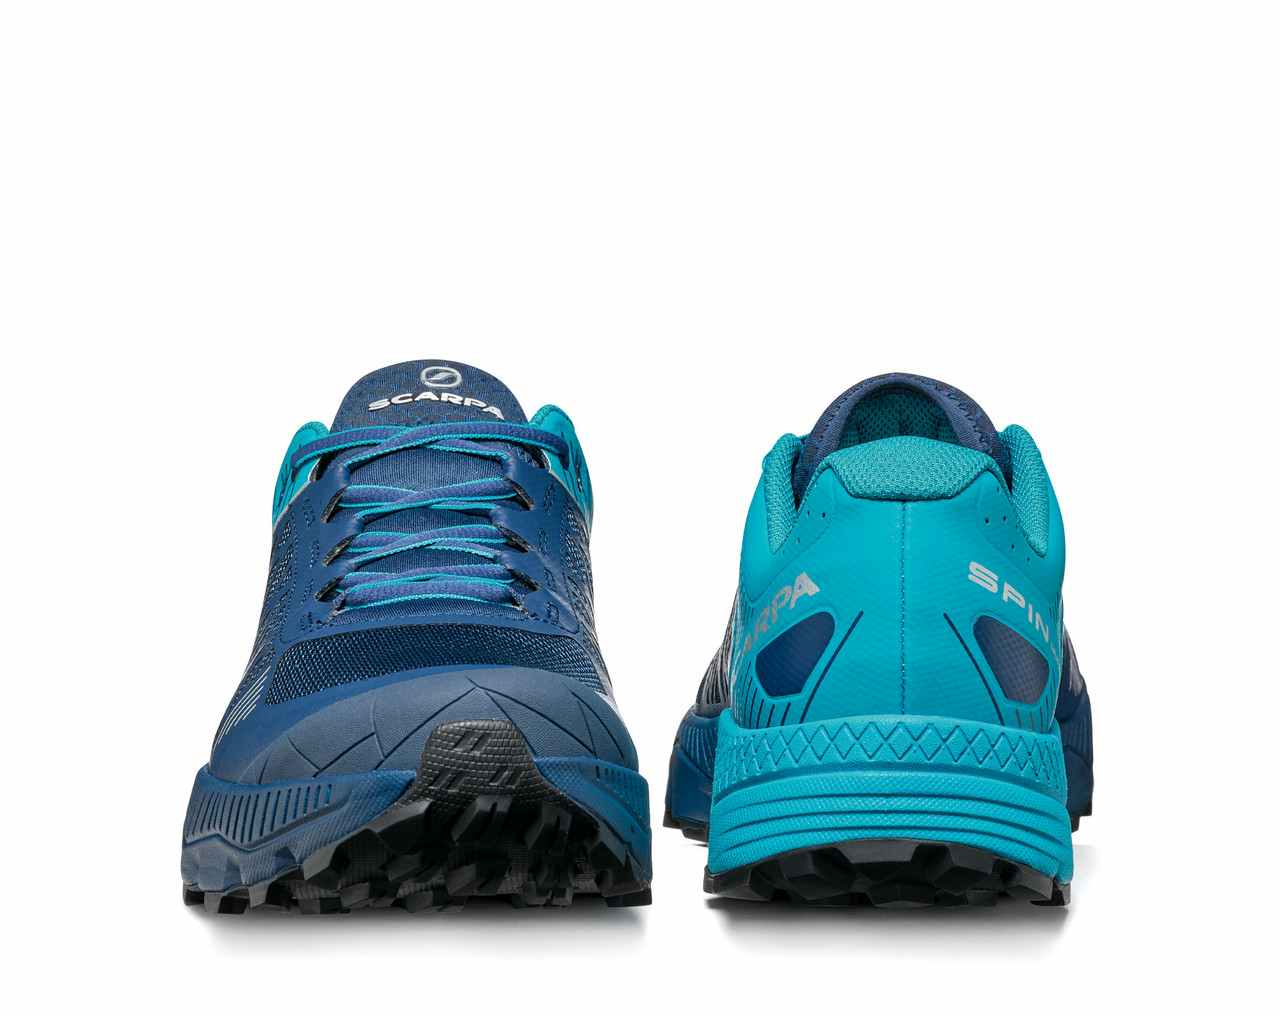 Spin Ultra Gore-Tex Trail Running Shoes Ottanio/Navy